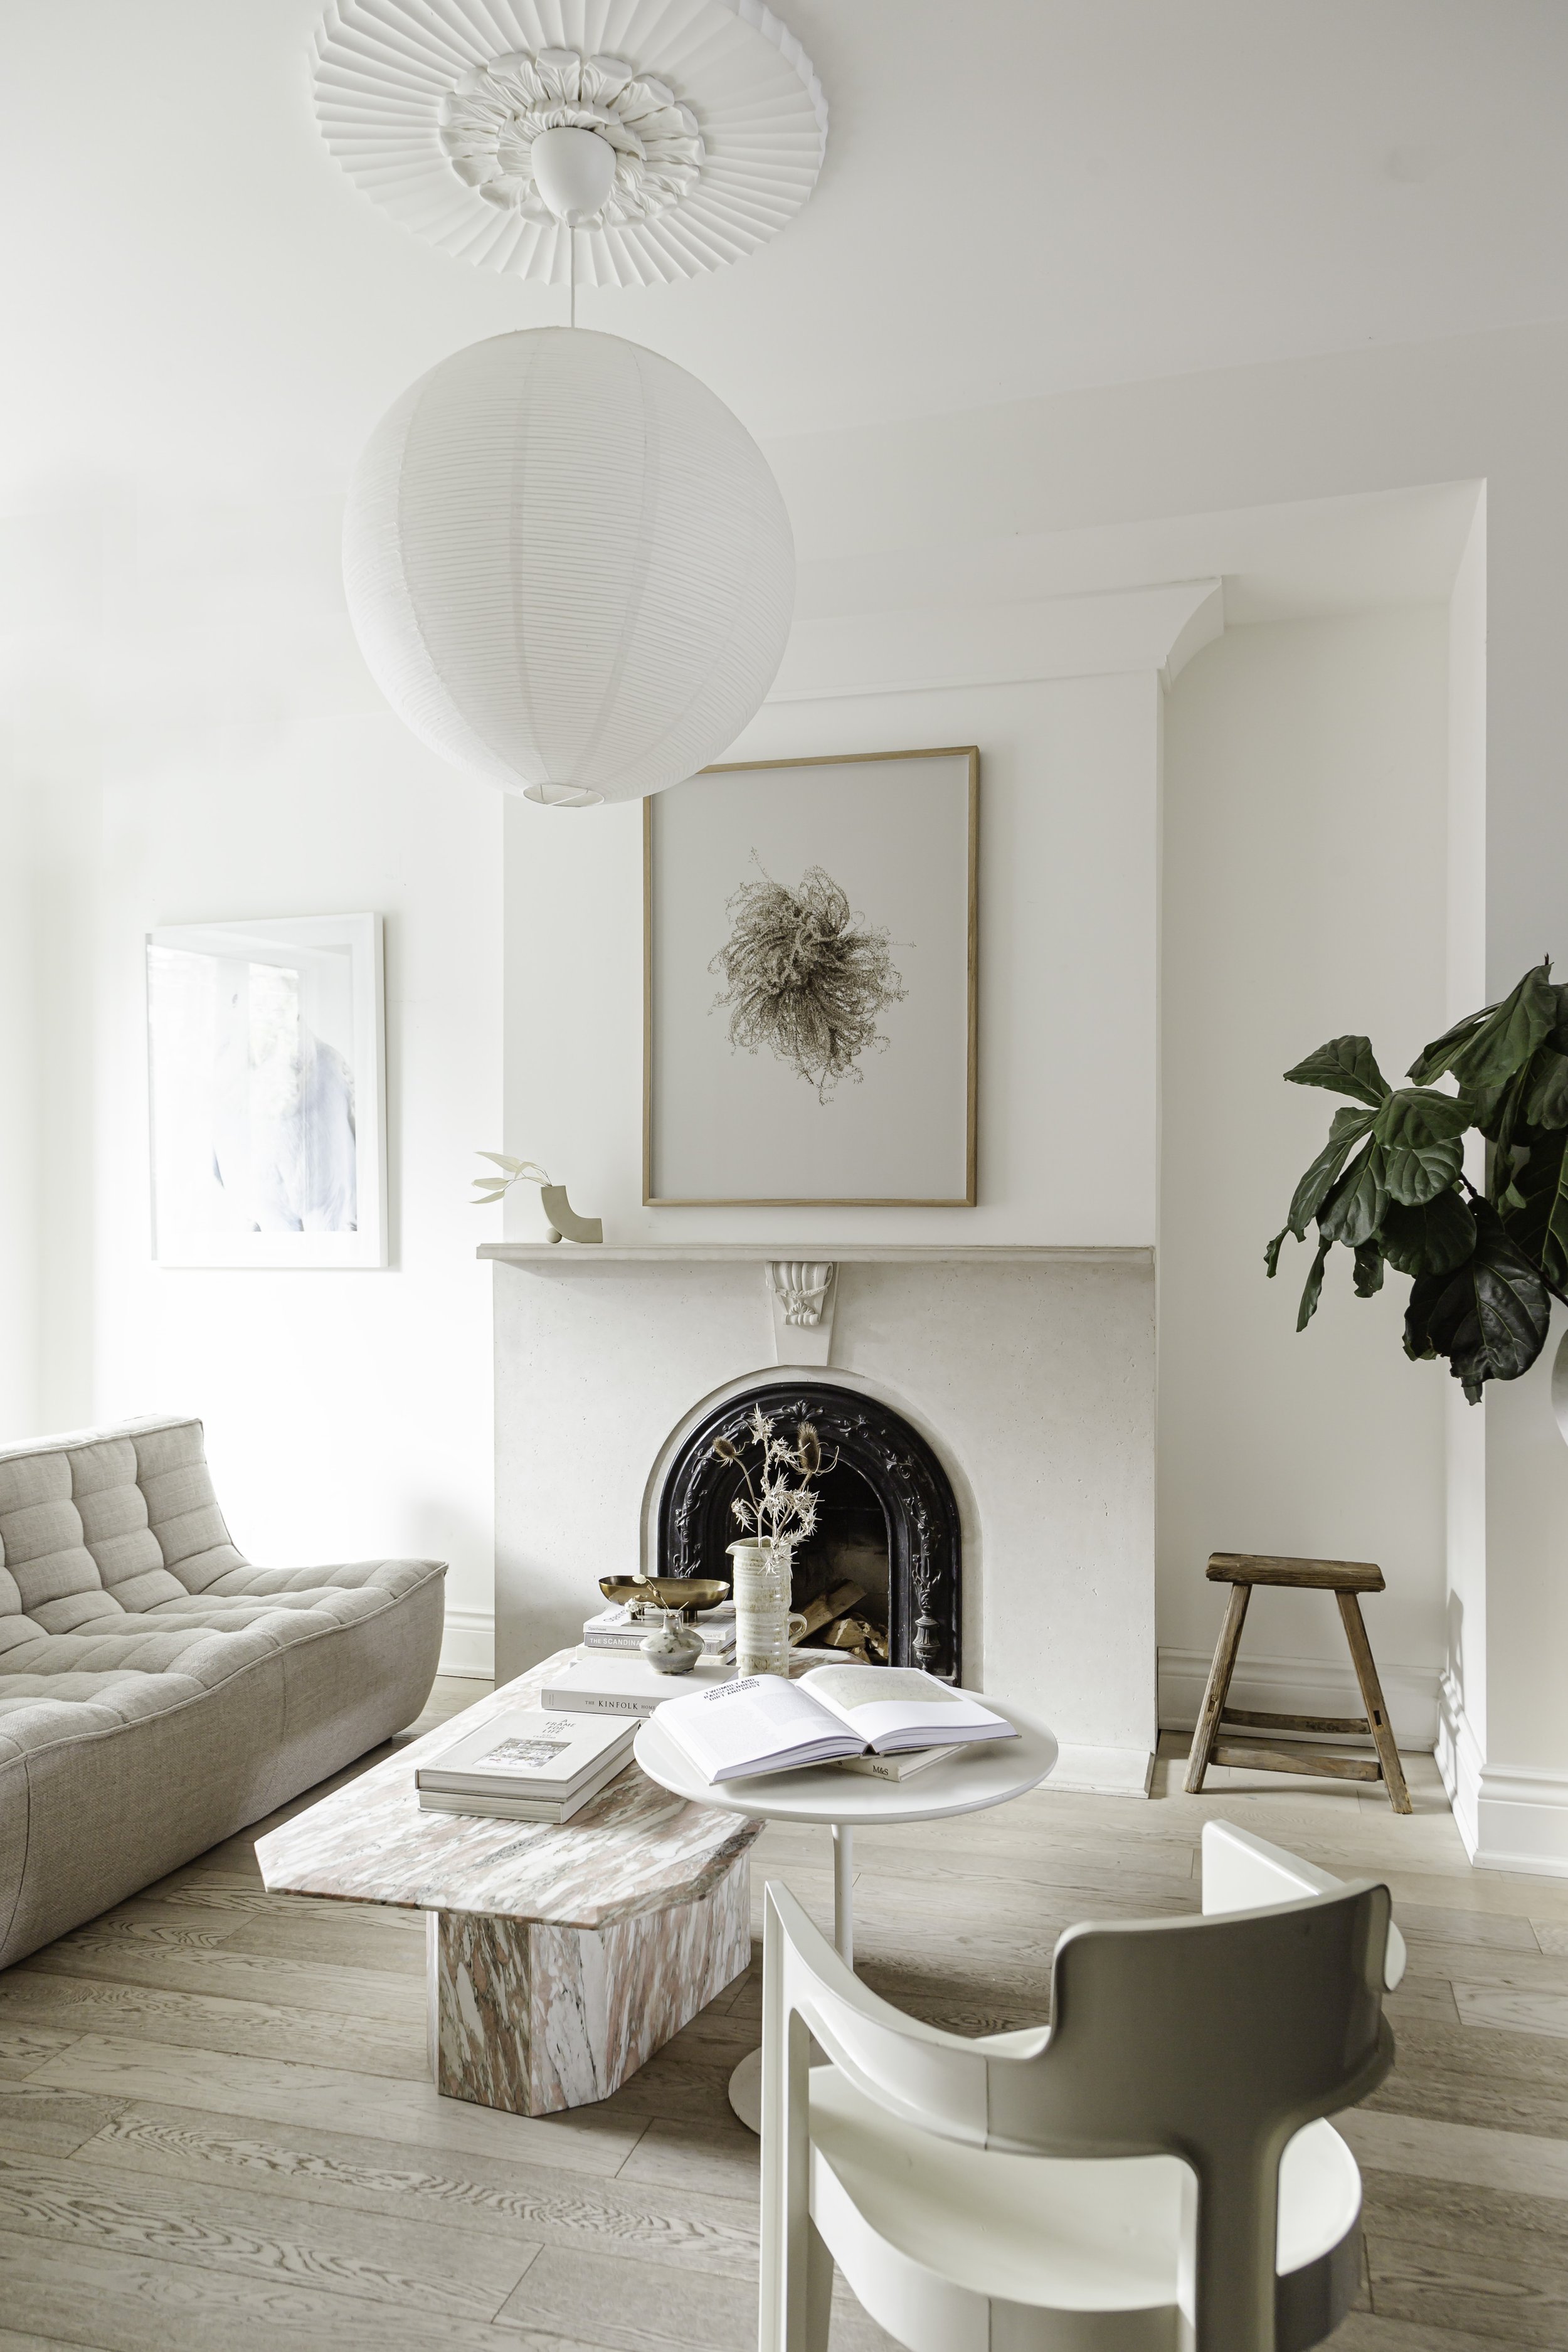 Discover The Art of Decorating With Neutral Colors With These Inspiring Interiors | Dezign Lover